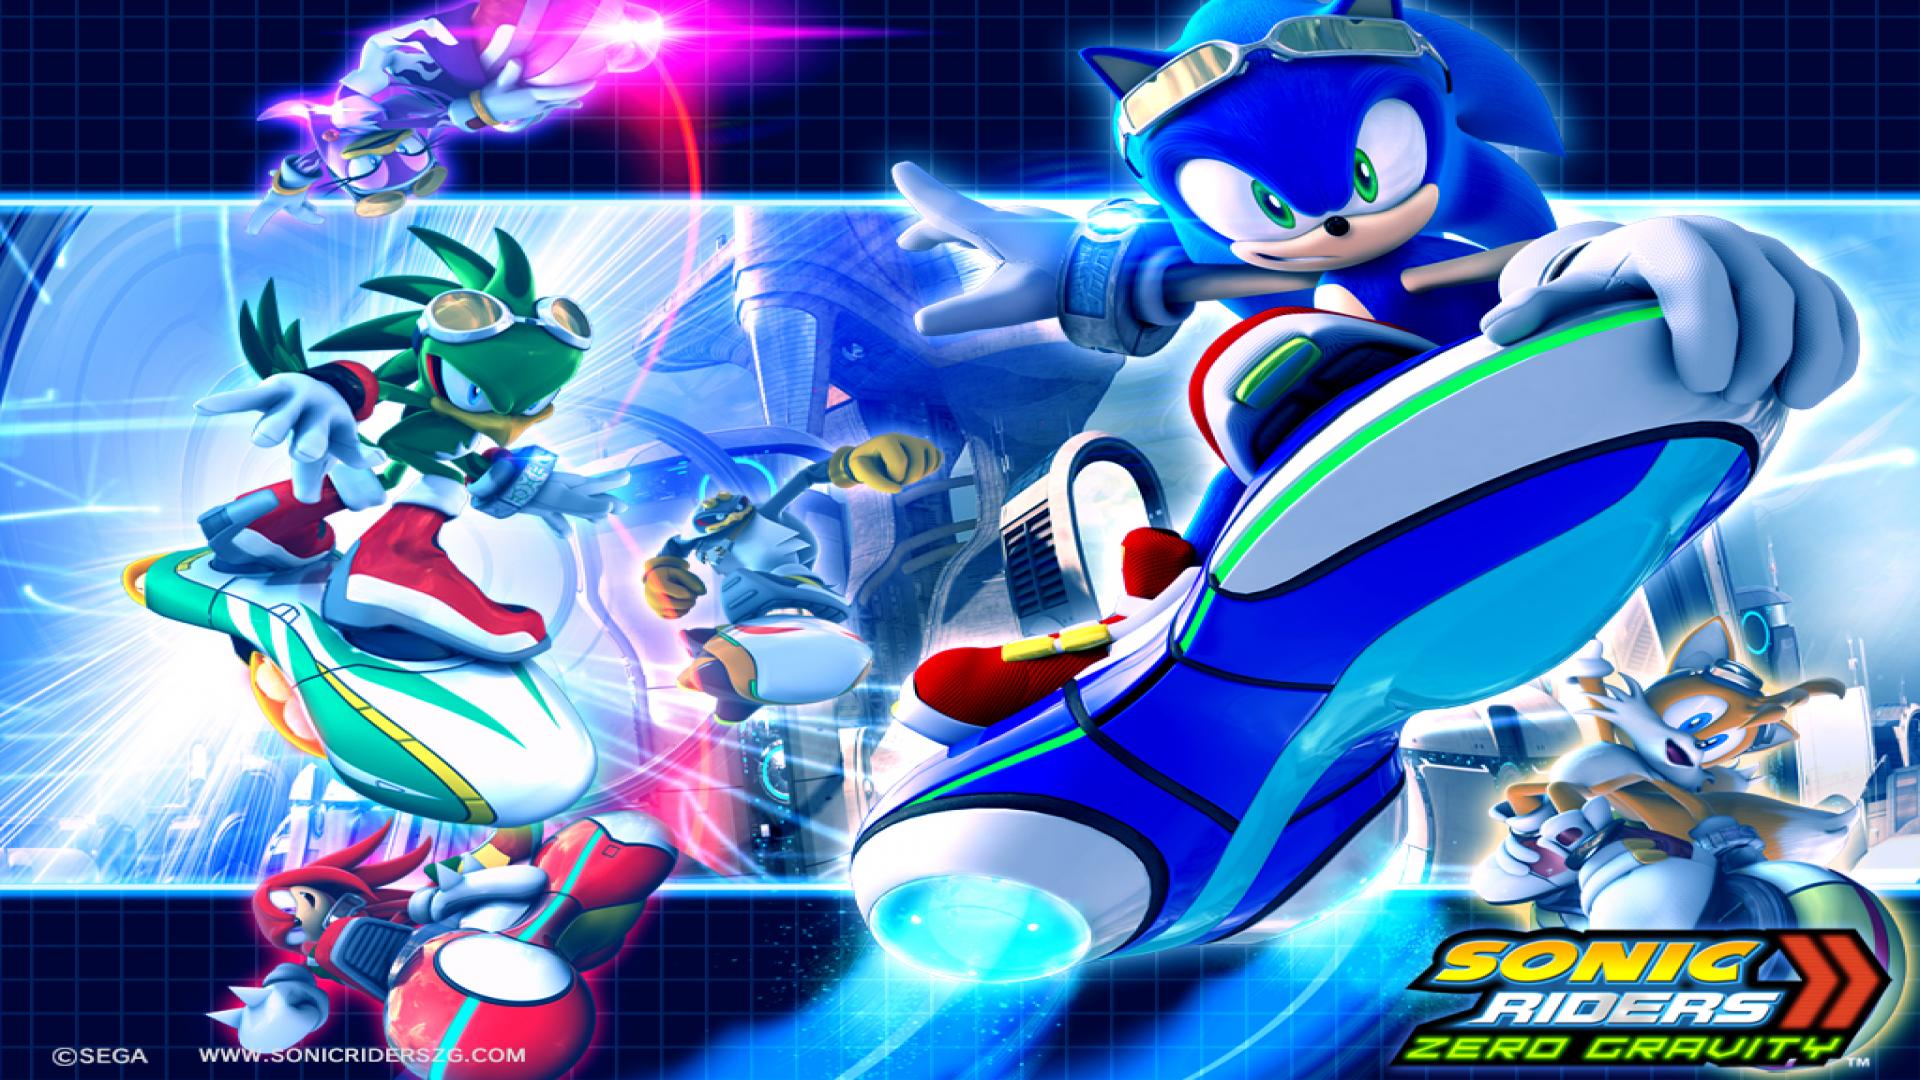 Sonic Riders Wallpaper Free Sonic Riders Background